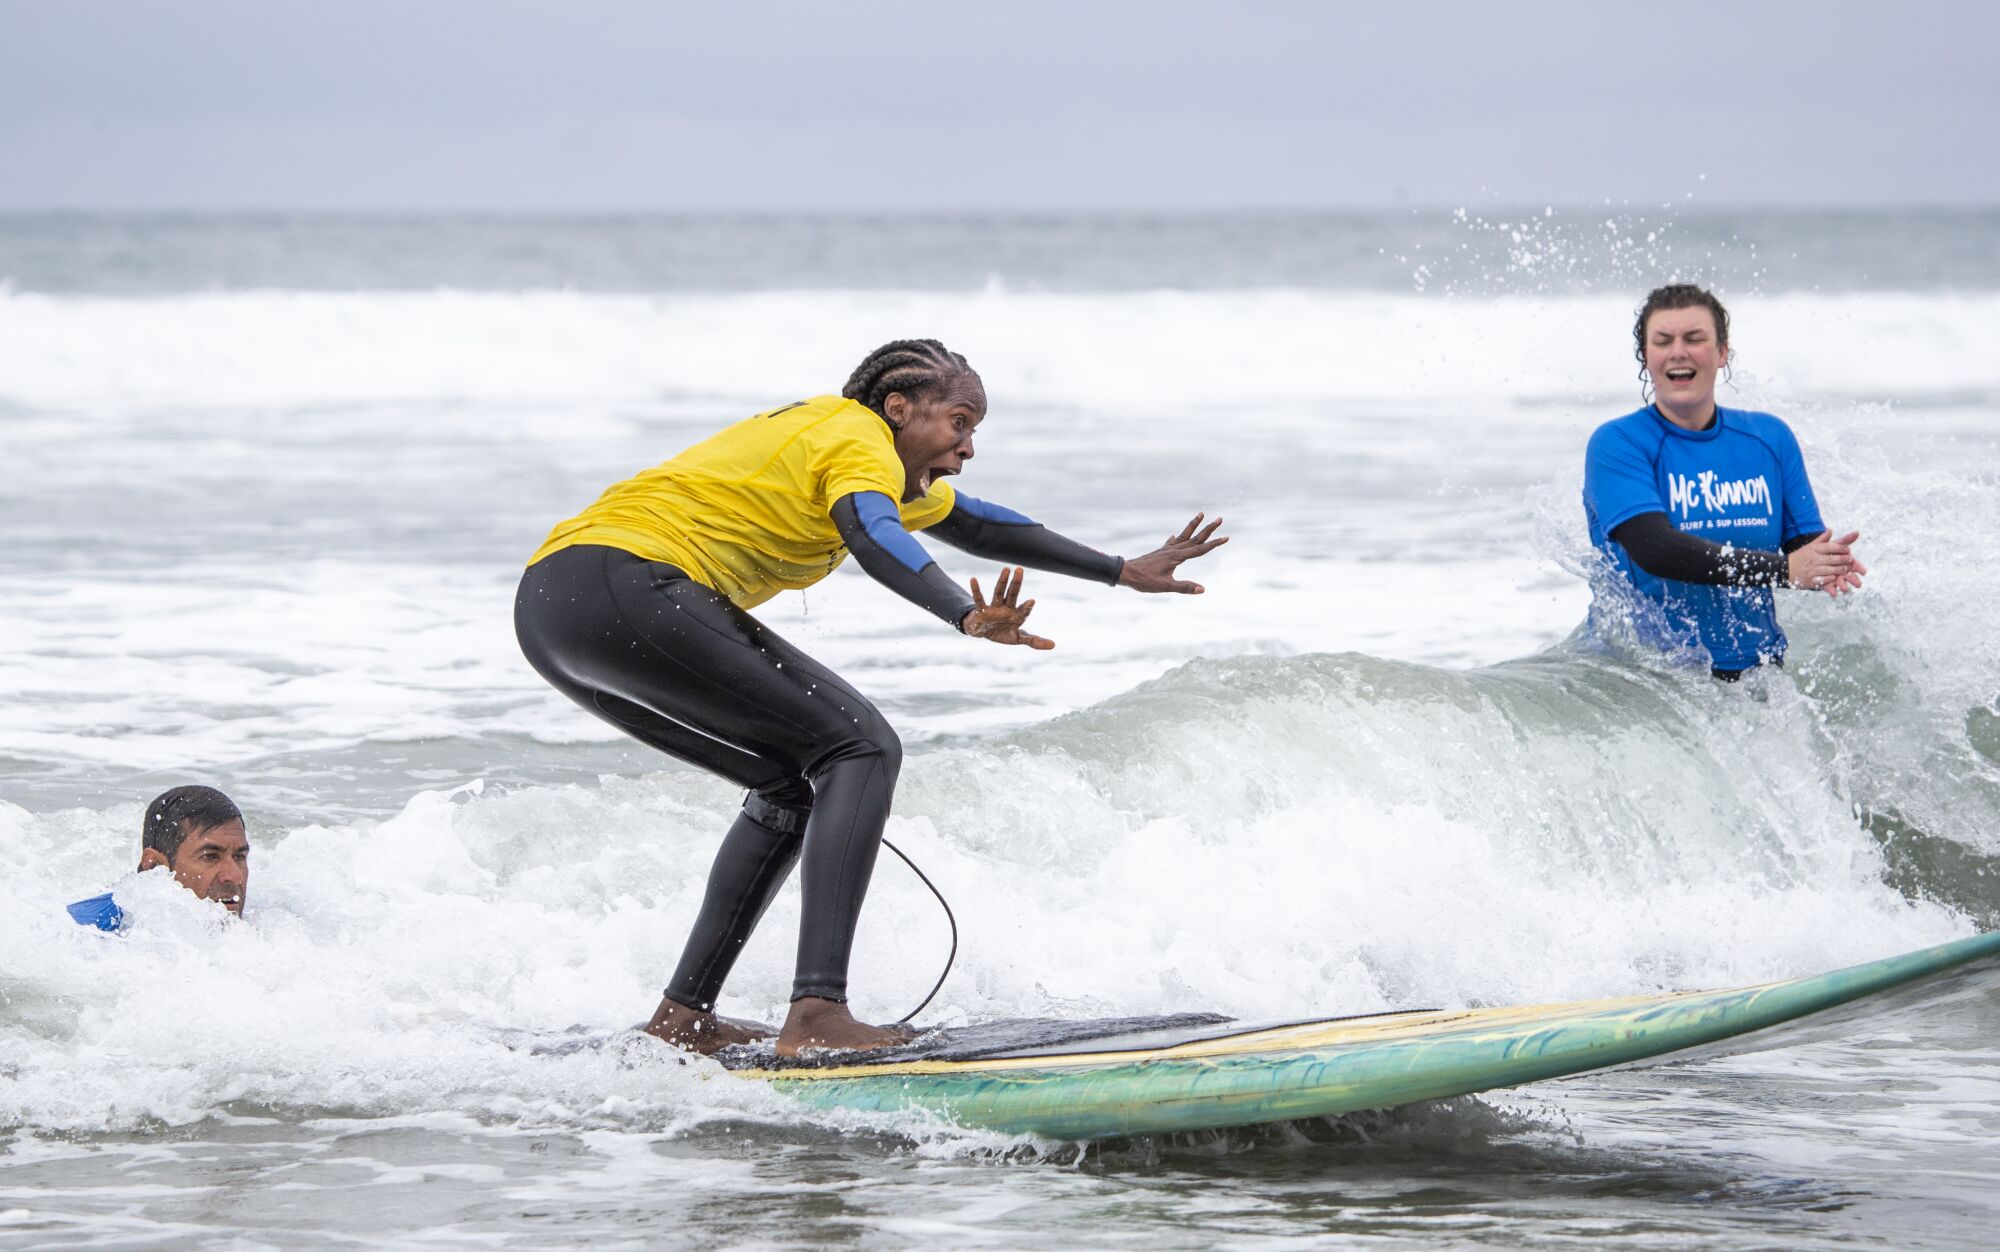 Surf coaches assist and cheer on Danielle Forbes as she rides her first wave during a surfing lesson.